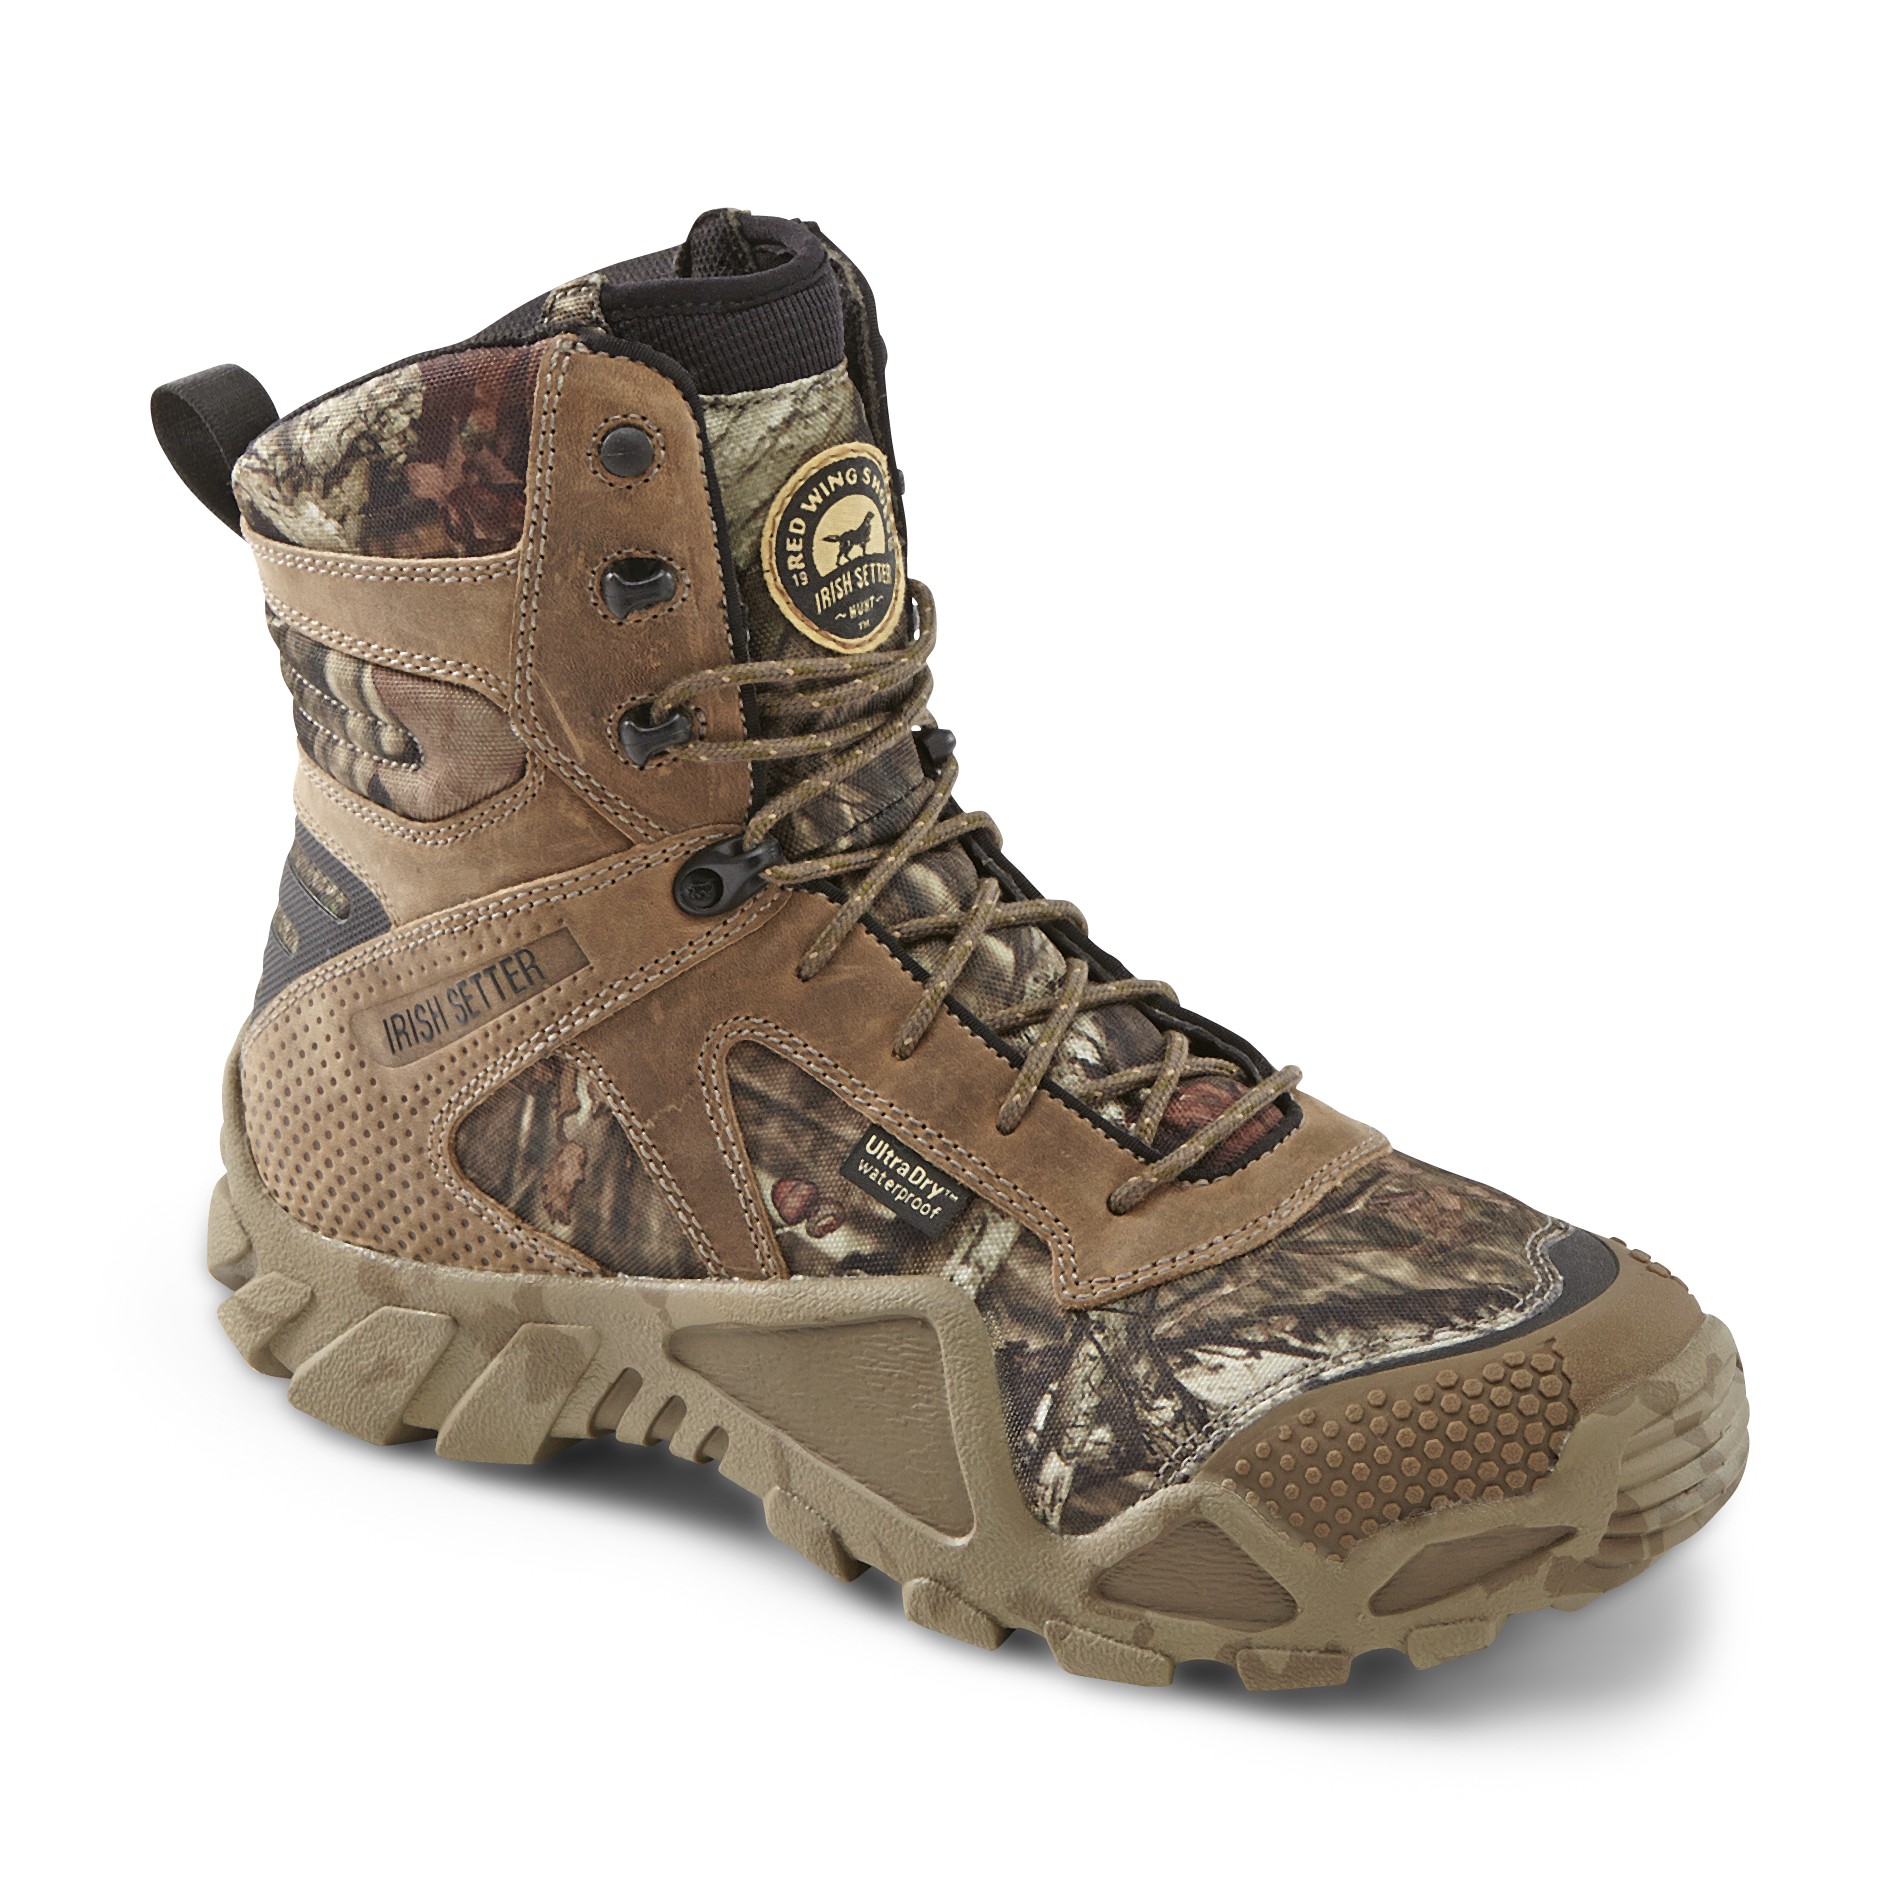 Irish Setter Boots by Red Wing Shoes Men's Vaprtrek 2874 8" Olive/Camo Insulated Waterproof Hunting Boot